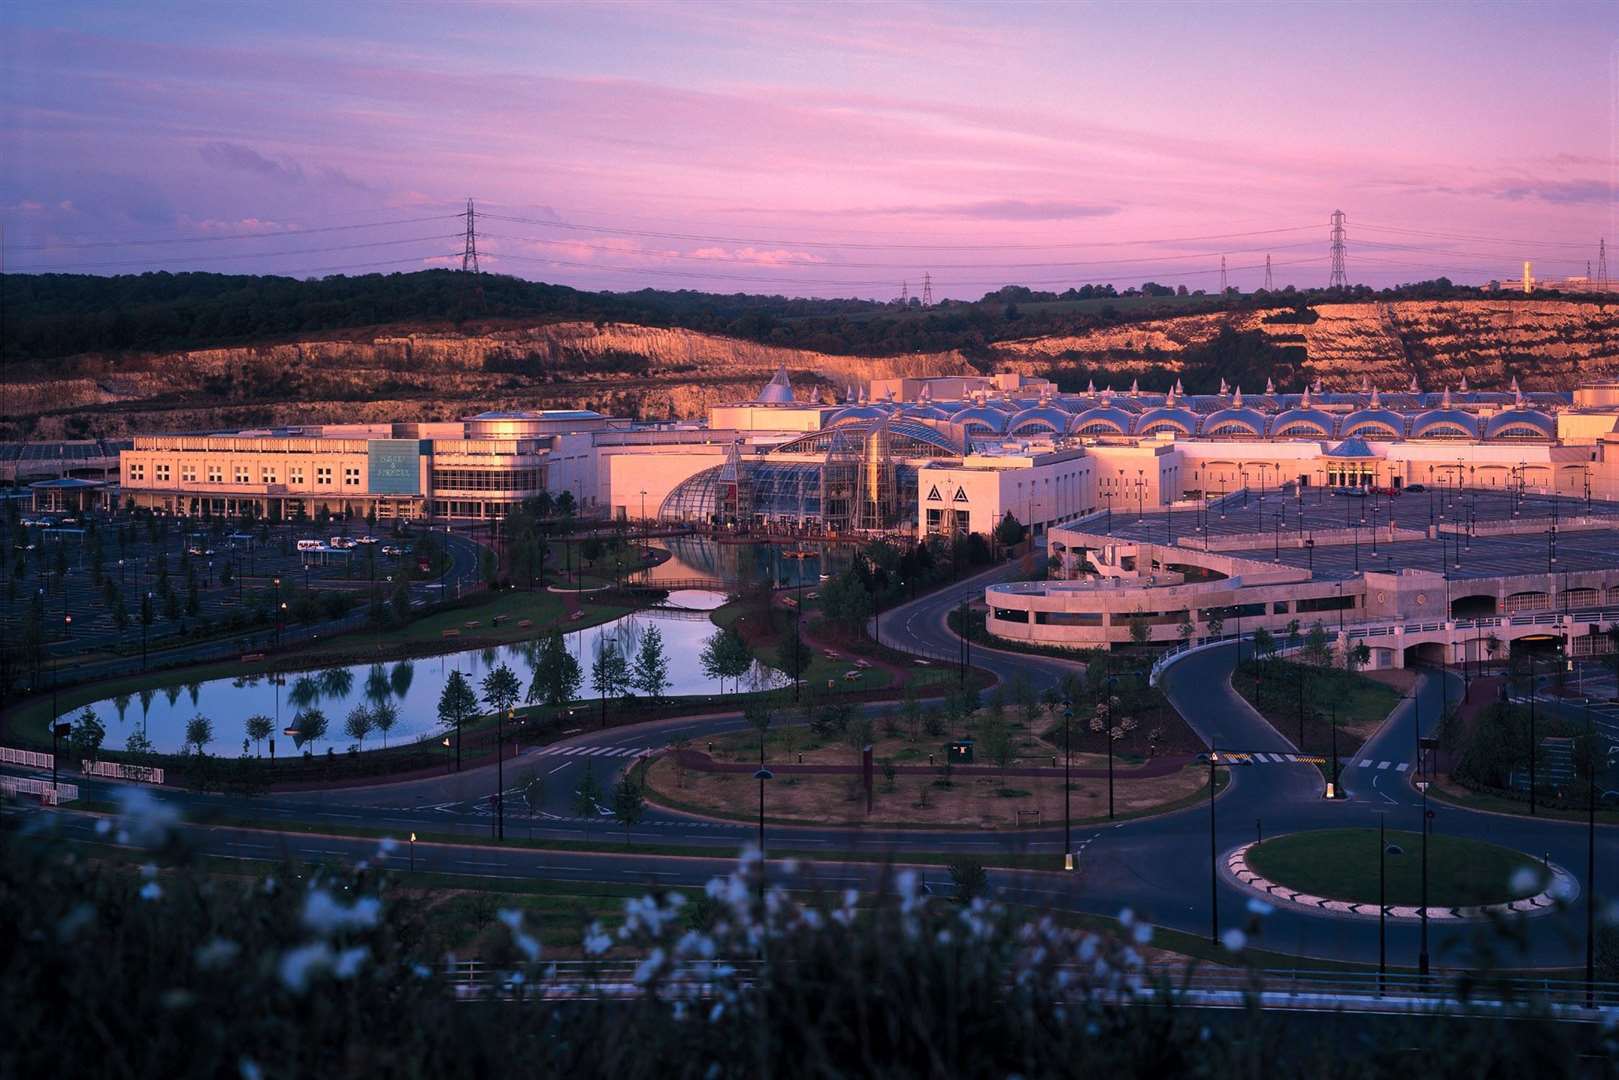 Bluewater Shopping Centre has undergone a metamorphosis since first opening to shoppers in 1999. Photo: Bluewater